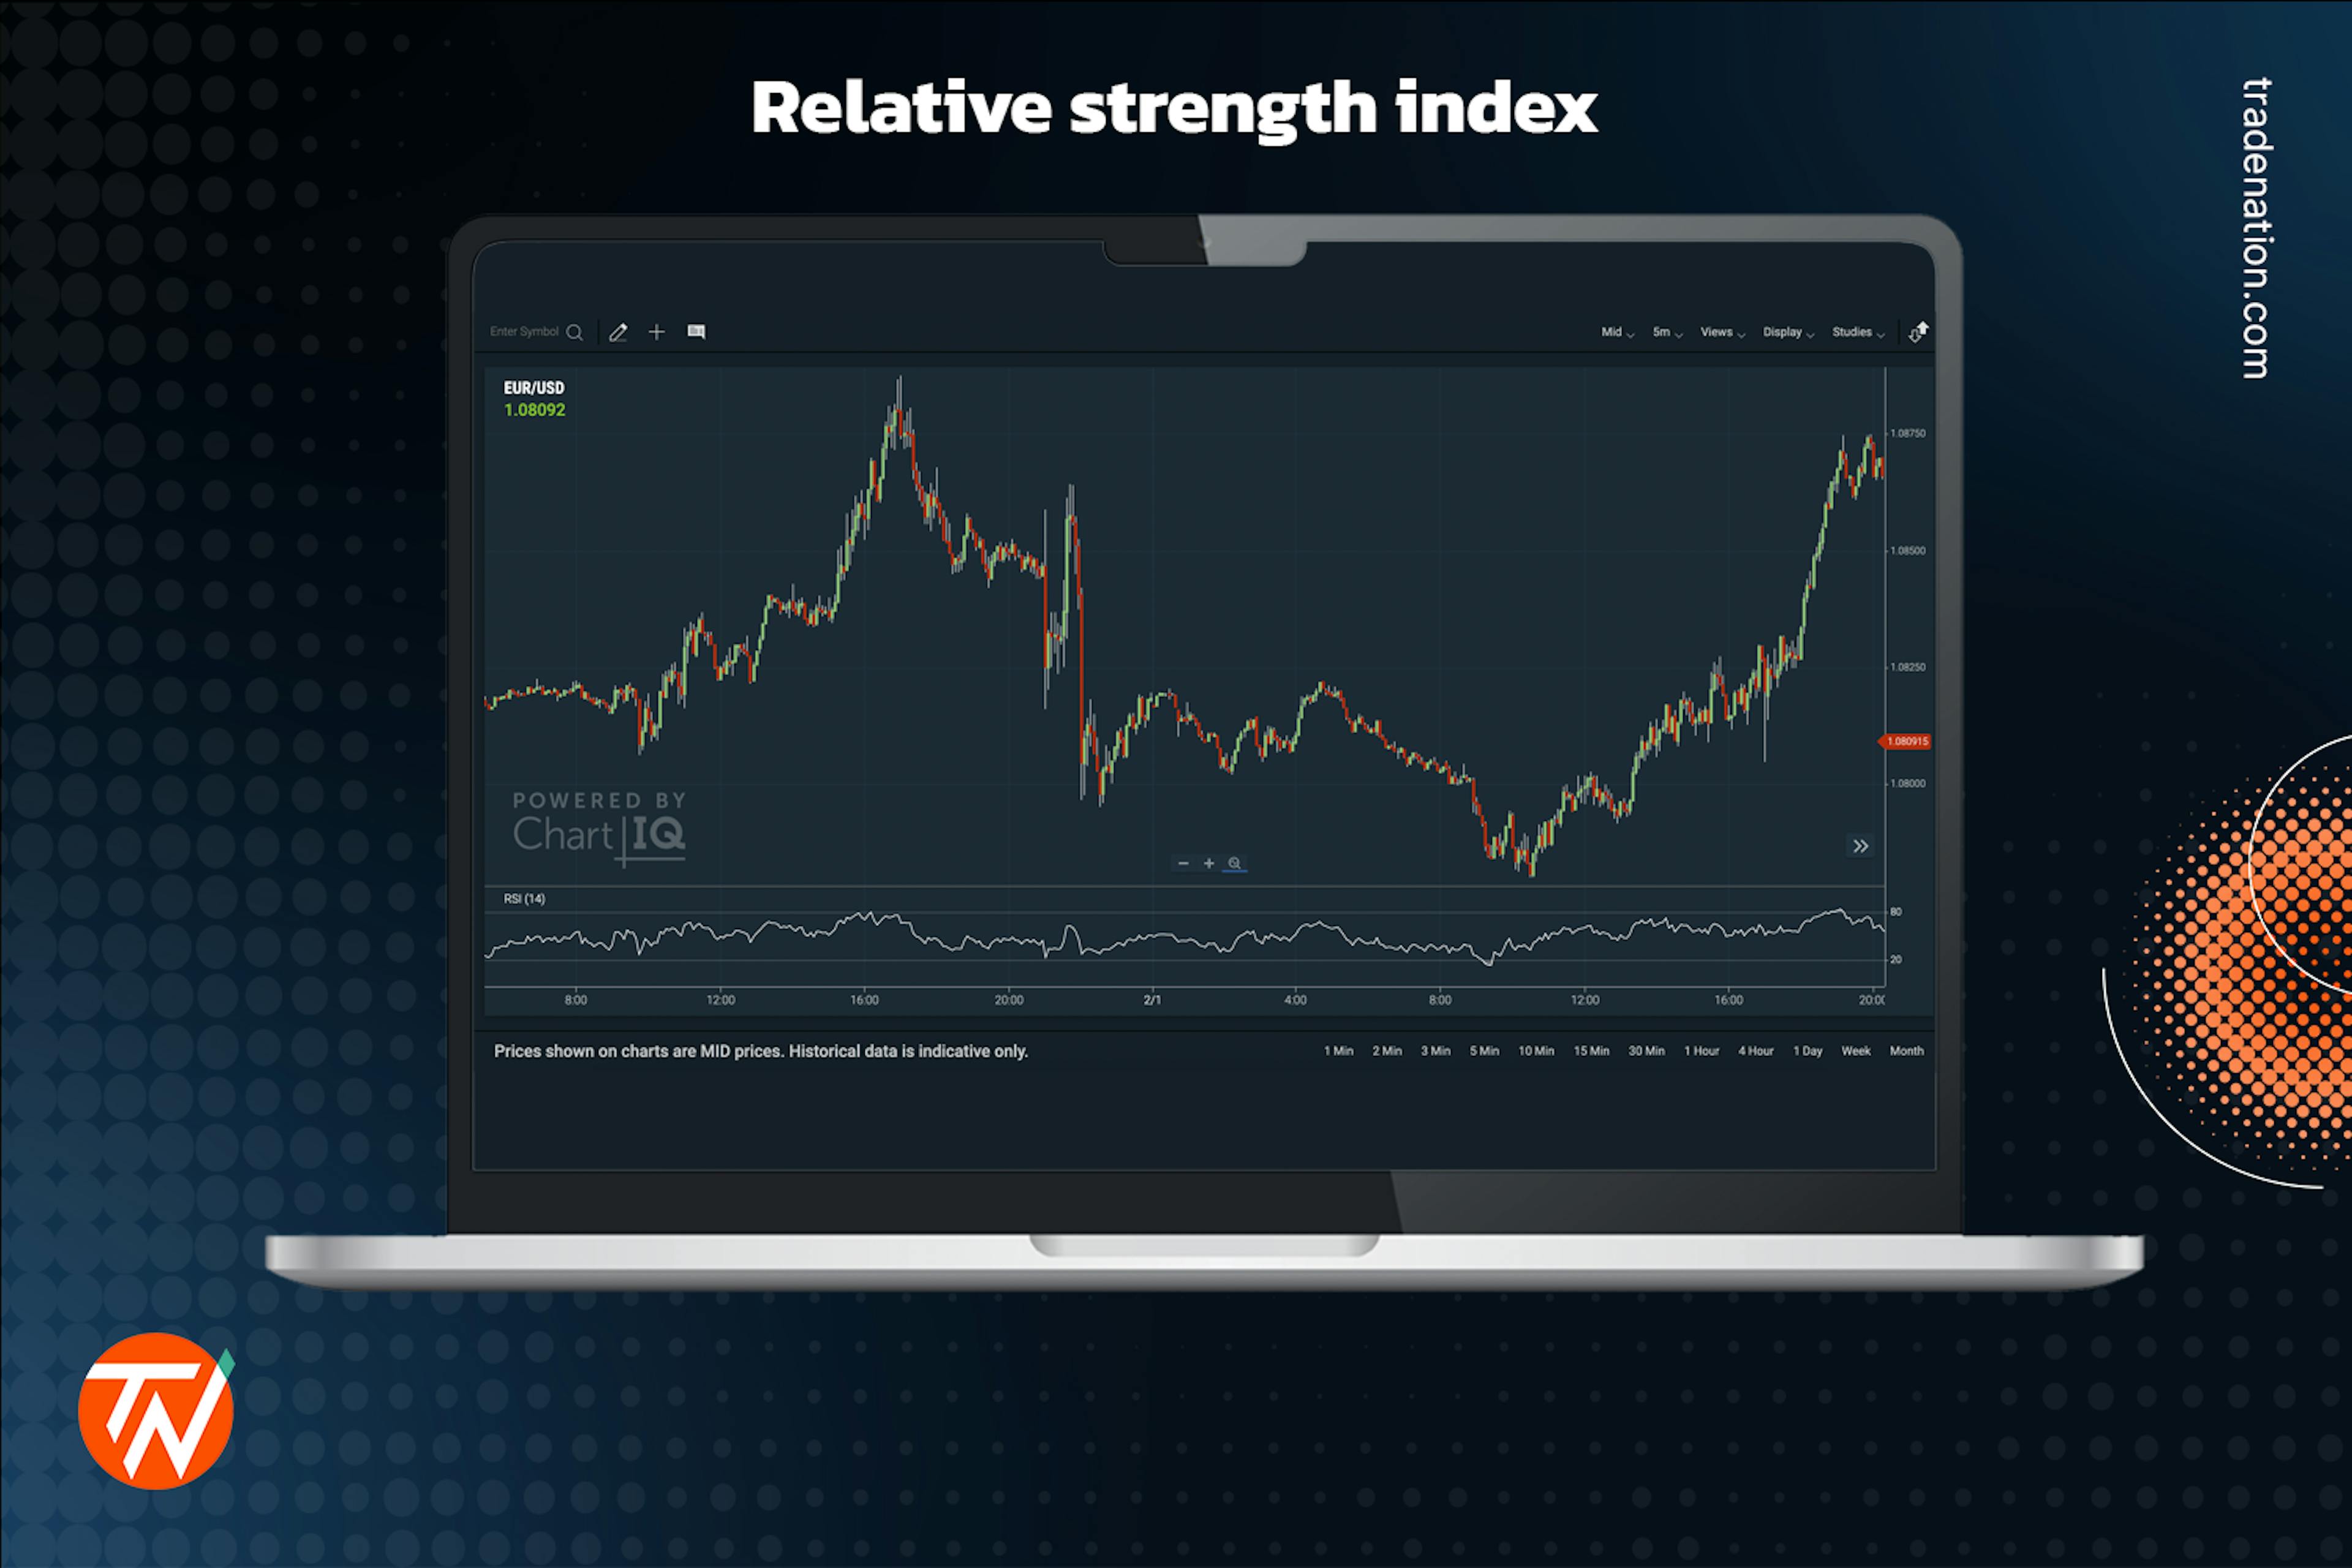 Relative strength index (RSI) demonstrated